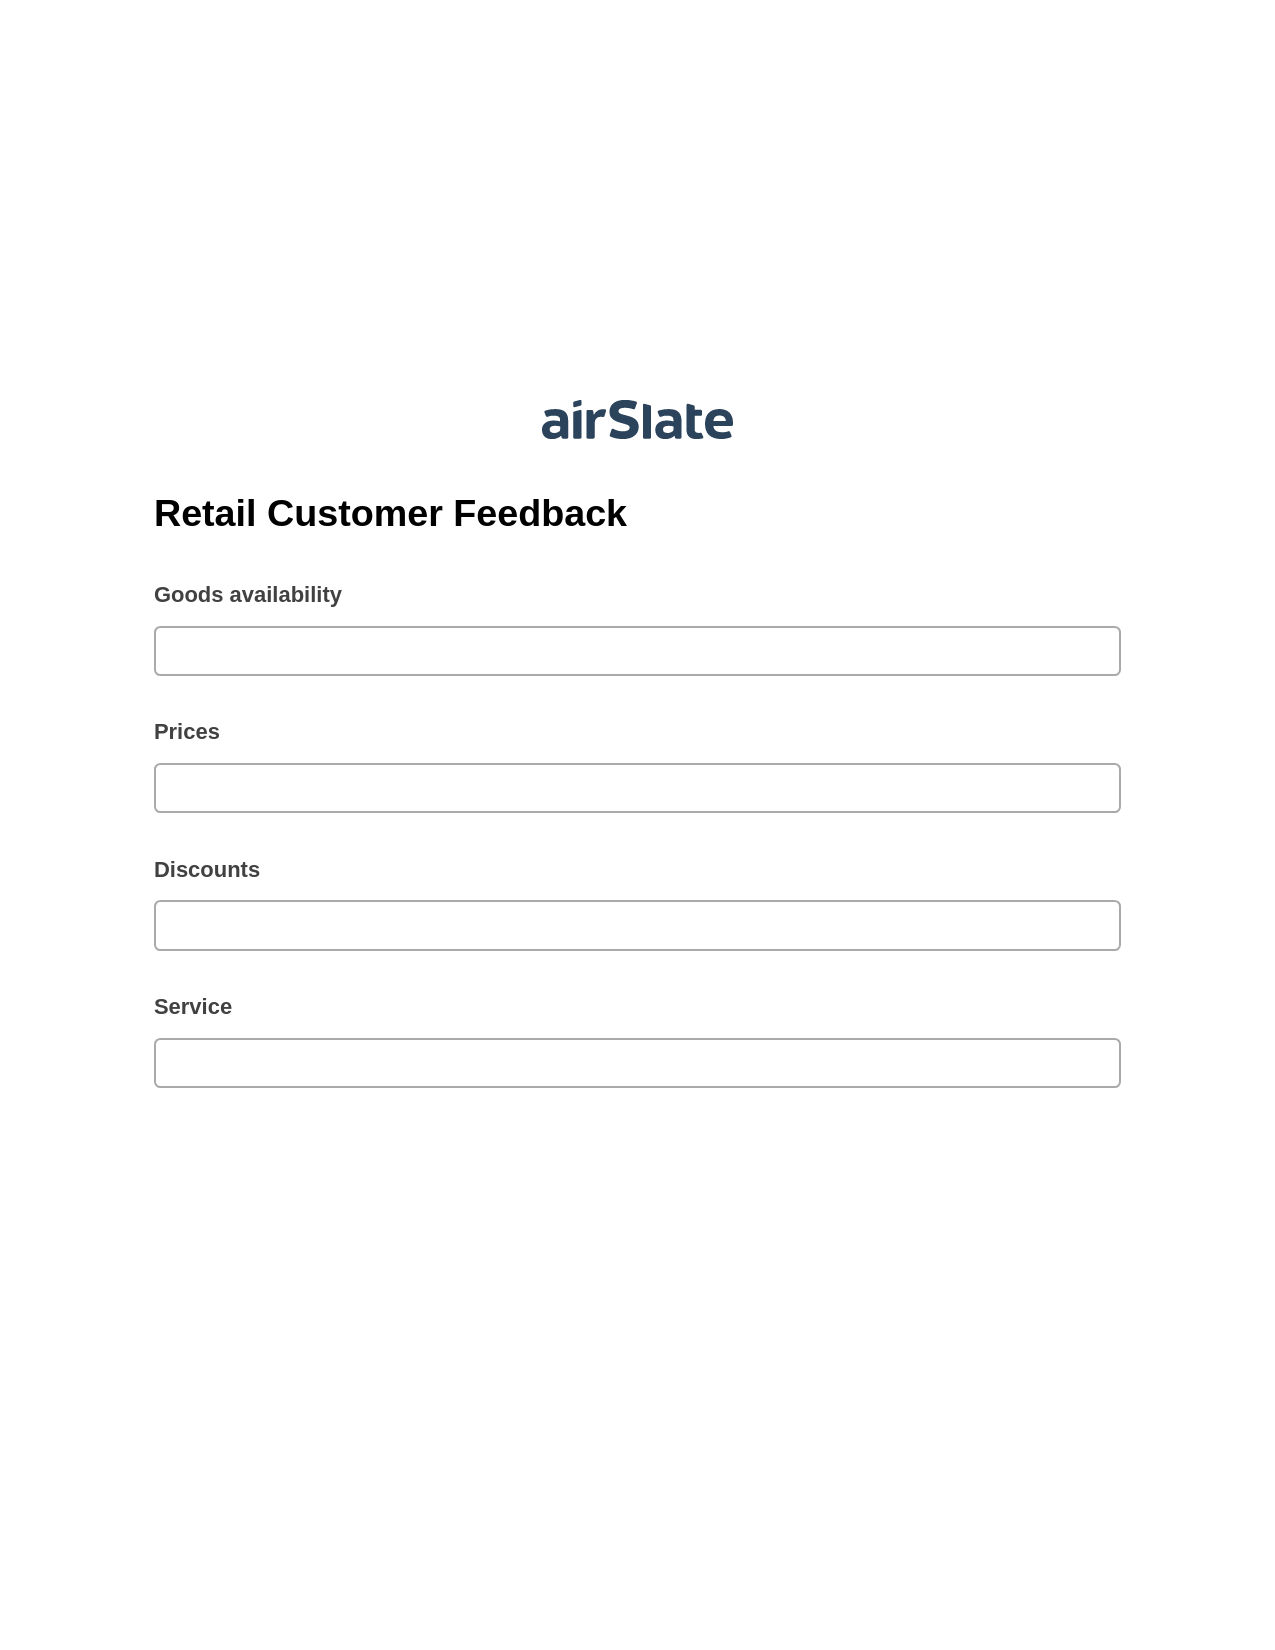 Retail Customer Feedback Pre-fill Slate from MS Dynamics 365 Records Bot, Update NetSuite Records Bot, Export to Formstack Documents Bot